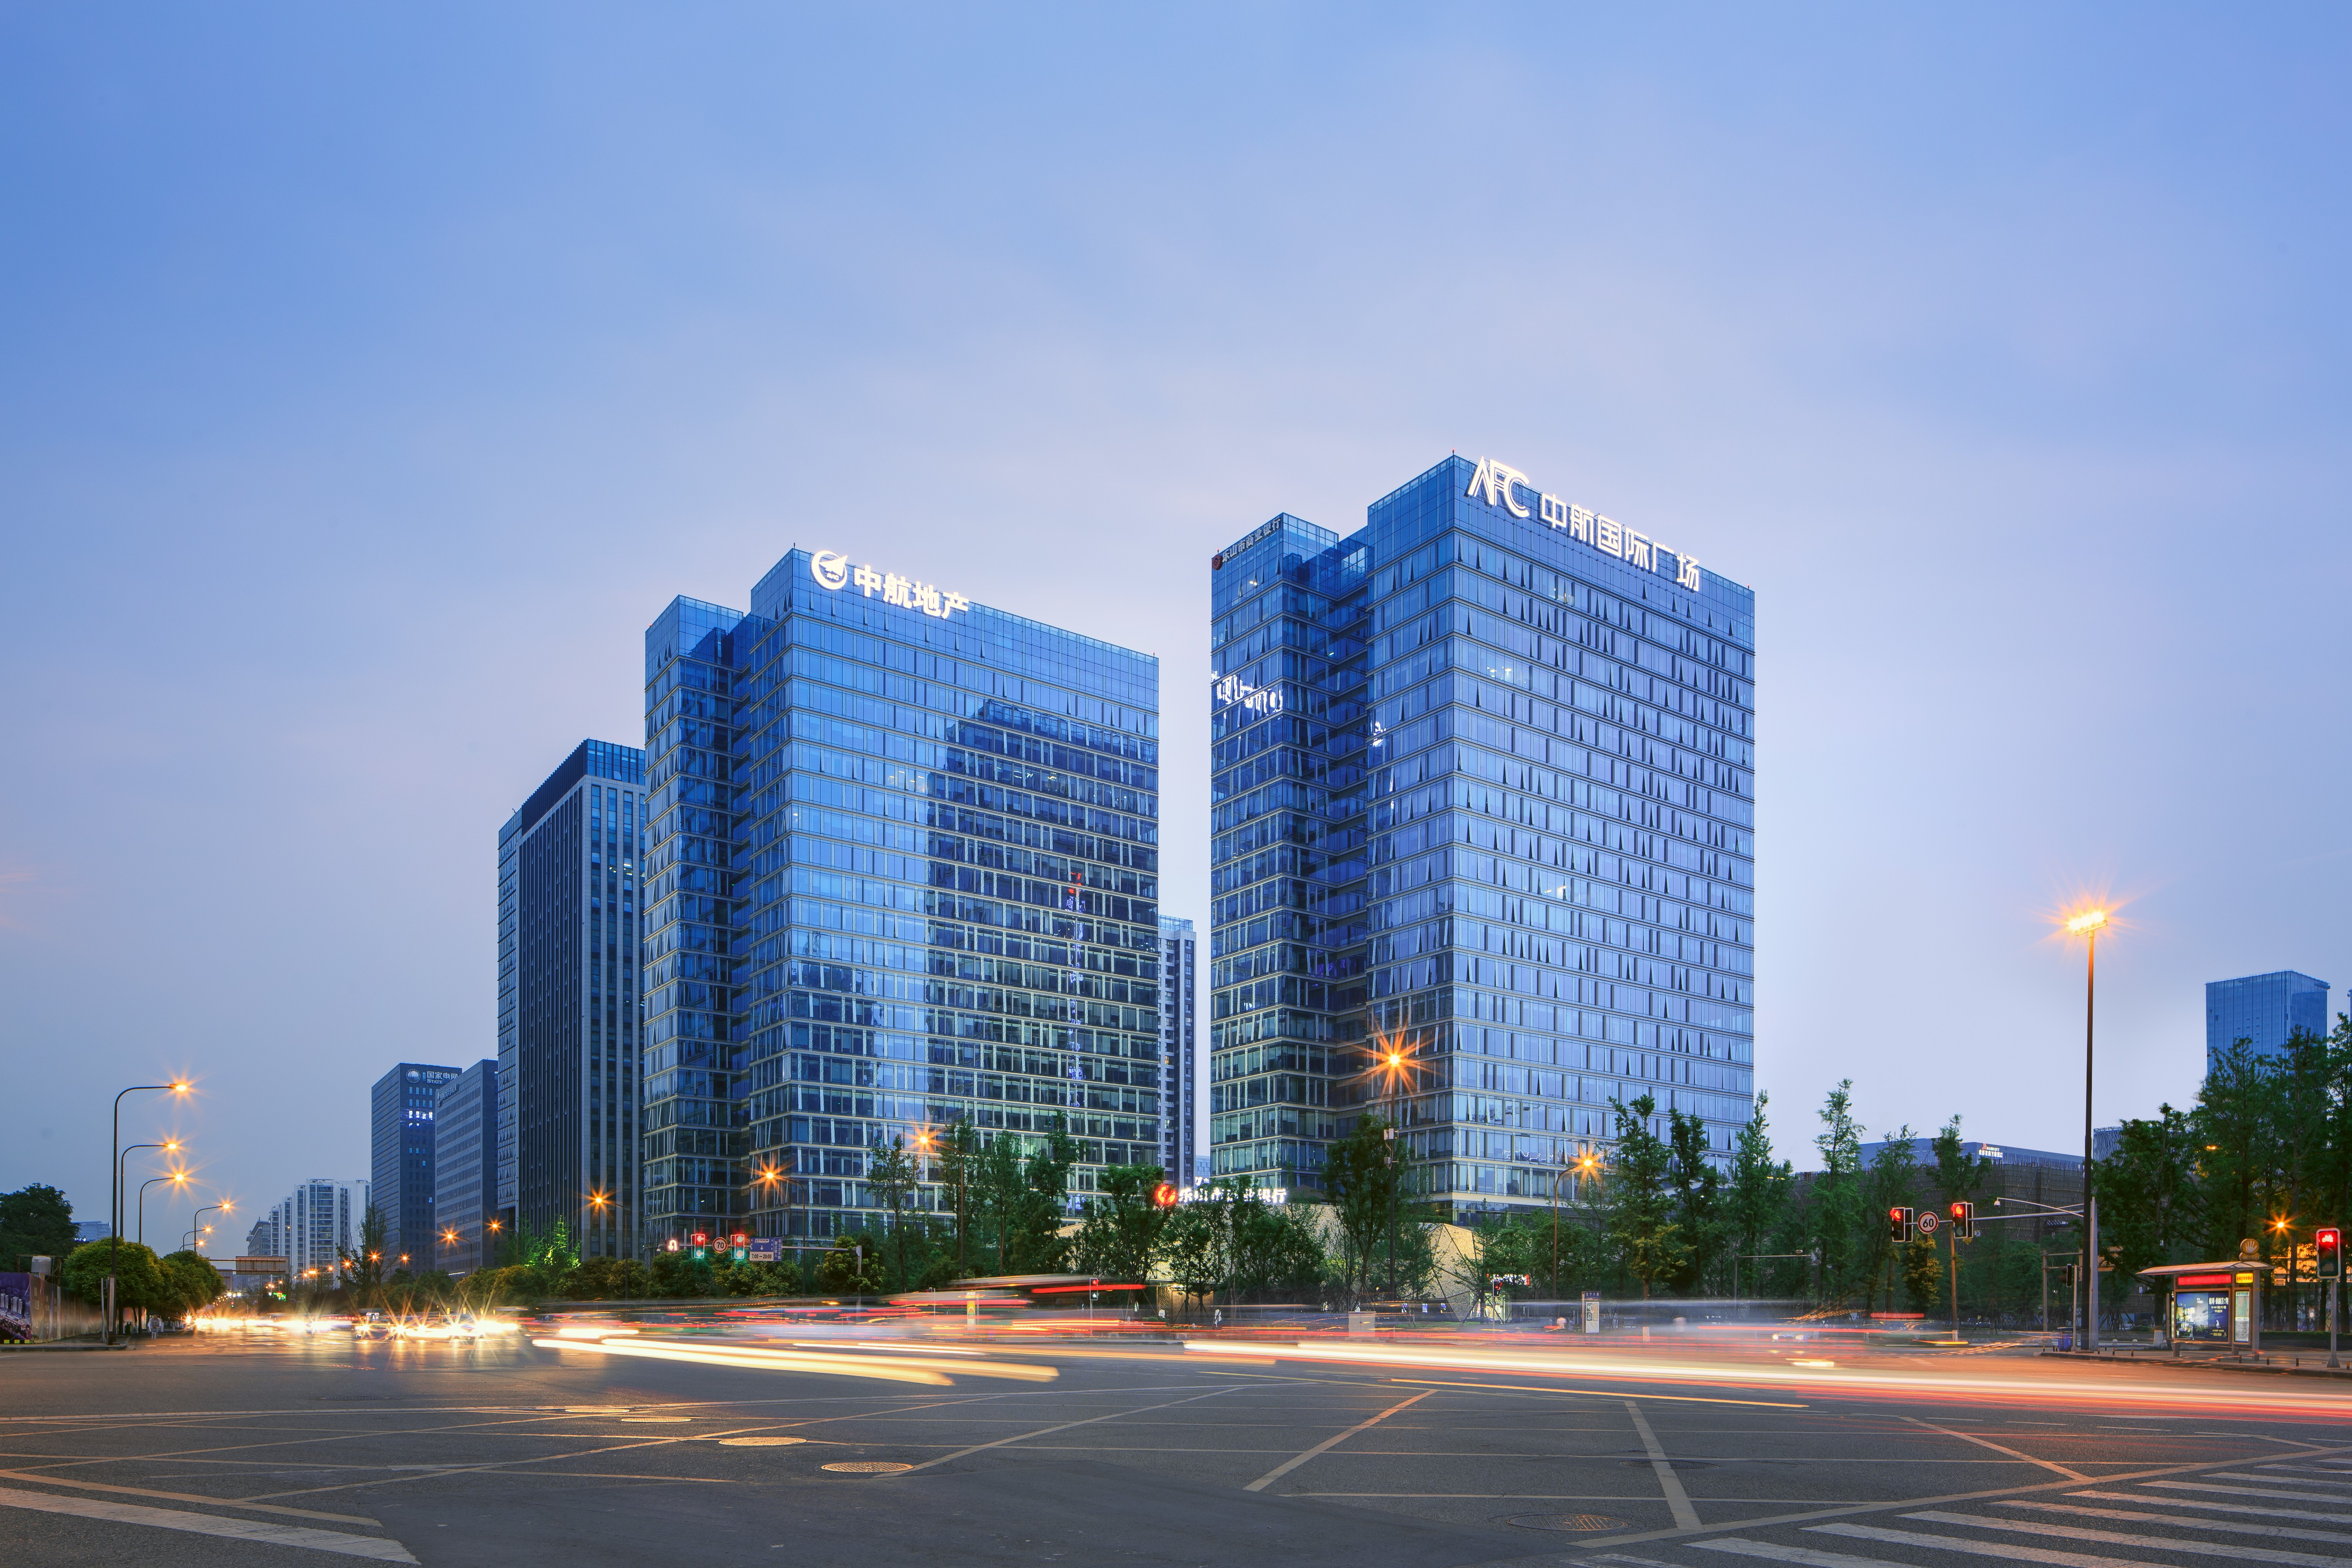 Units at AVIC International Financial Centre in Chengdu’s southern central business district are expected to be available to lease later this year .